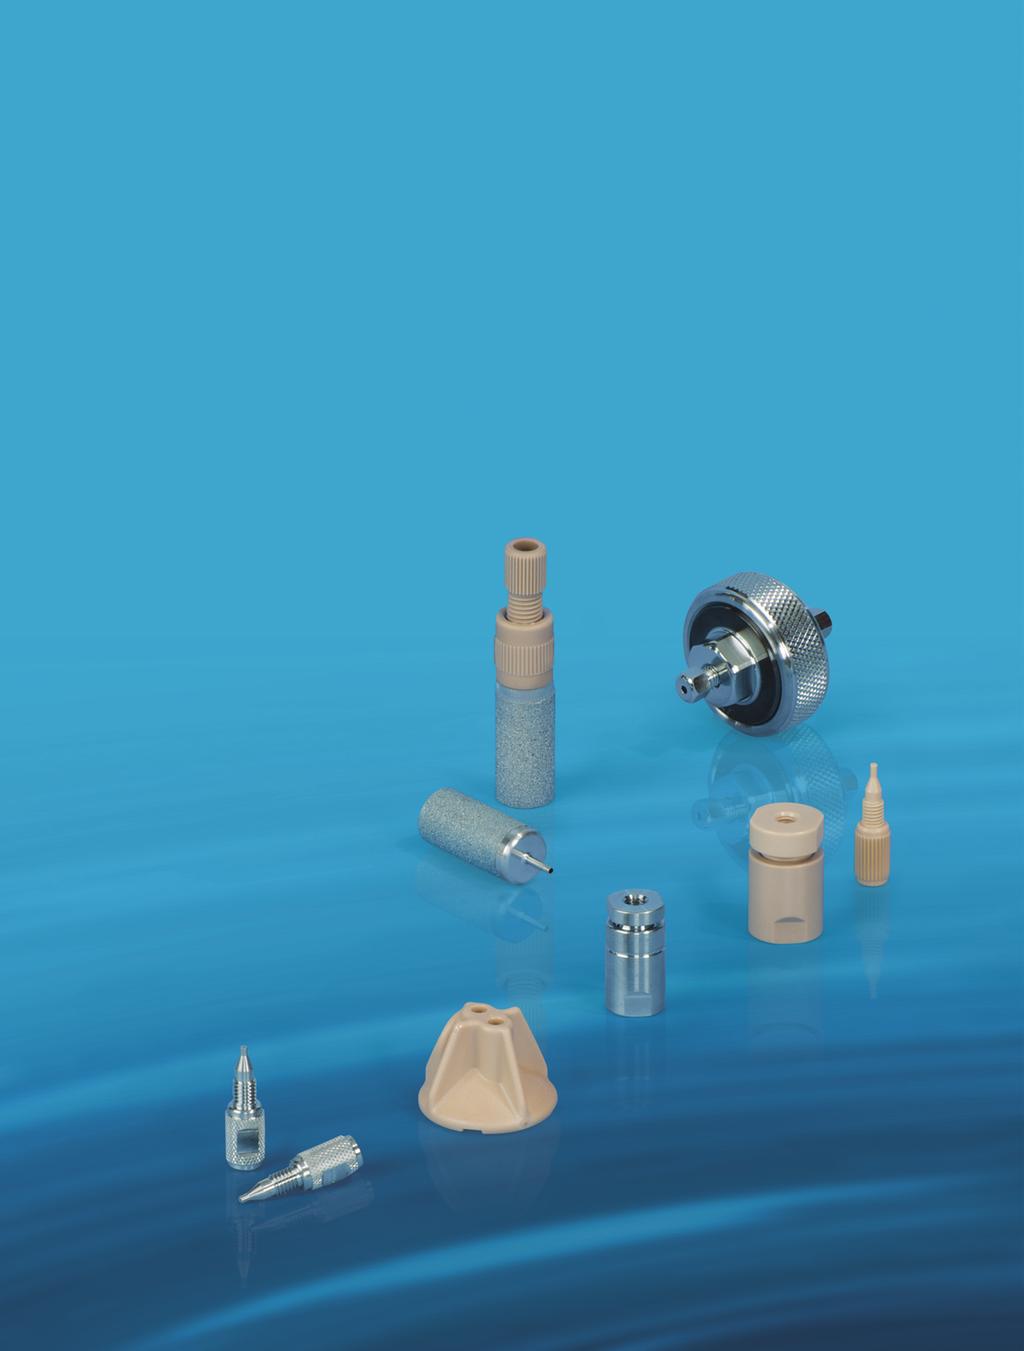 Inlet Solvent Filters Filters and Degassers General Use Inlet Solvent Filters Large Surface Areas disposable µm, 0 µm, and 0 µm Pore Sizes Available General Use and Prep Filters for Higher Flow